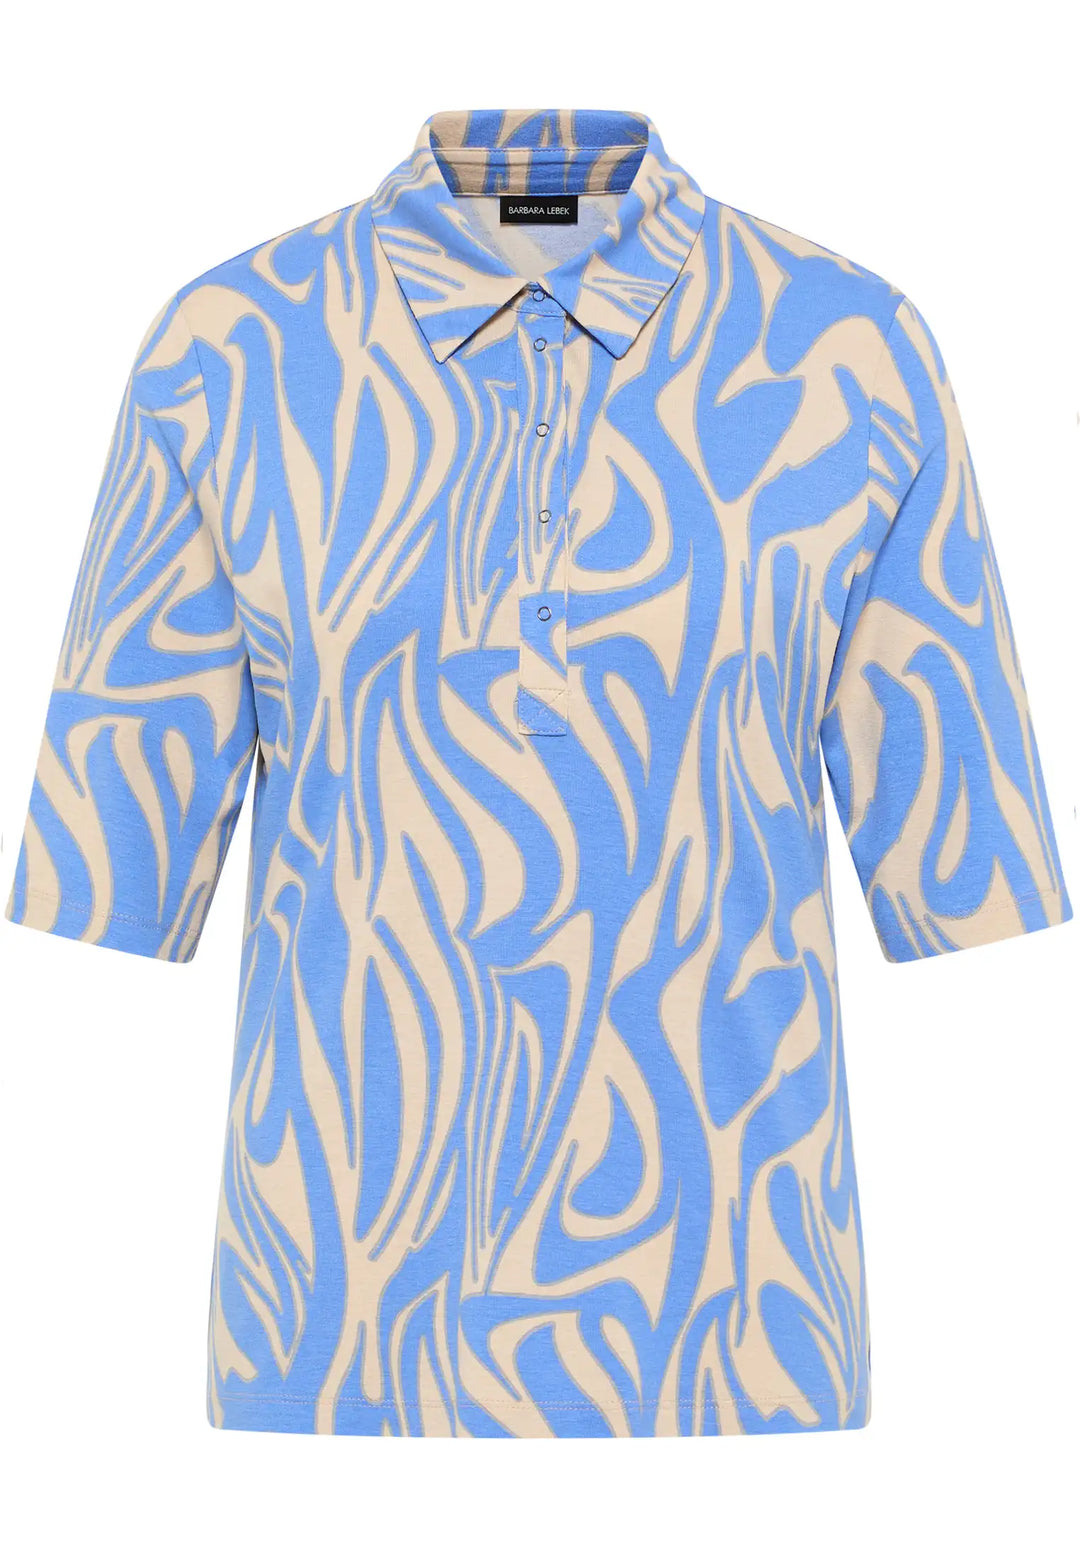 Blue and beige zebra print polo shirt with collar and button placket by Barbara Lebek, style 60020042-730